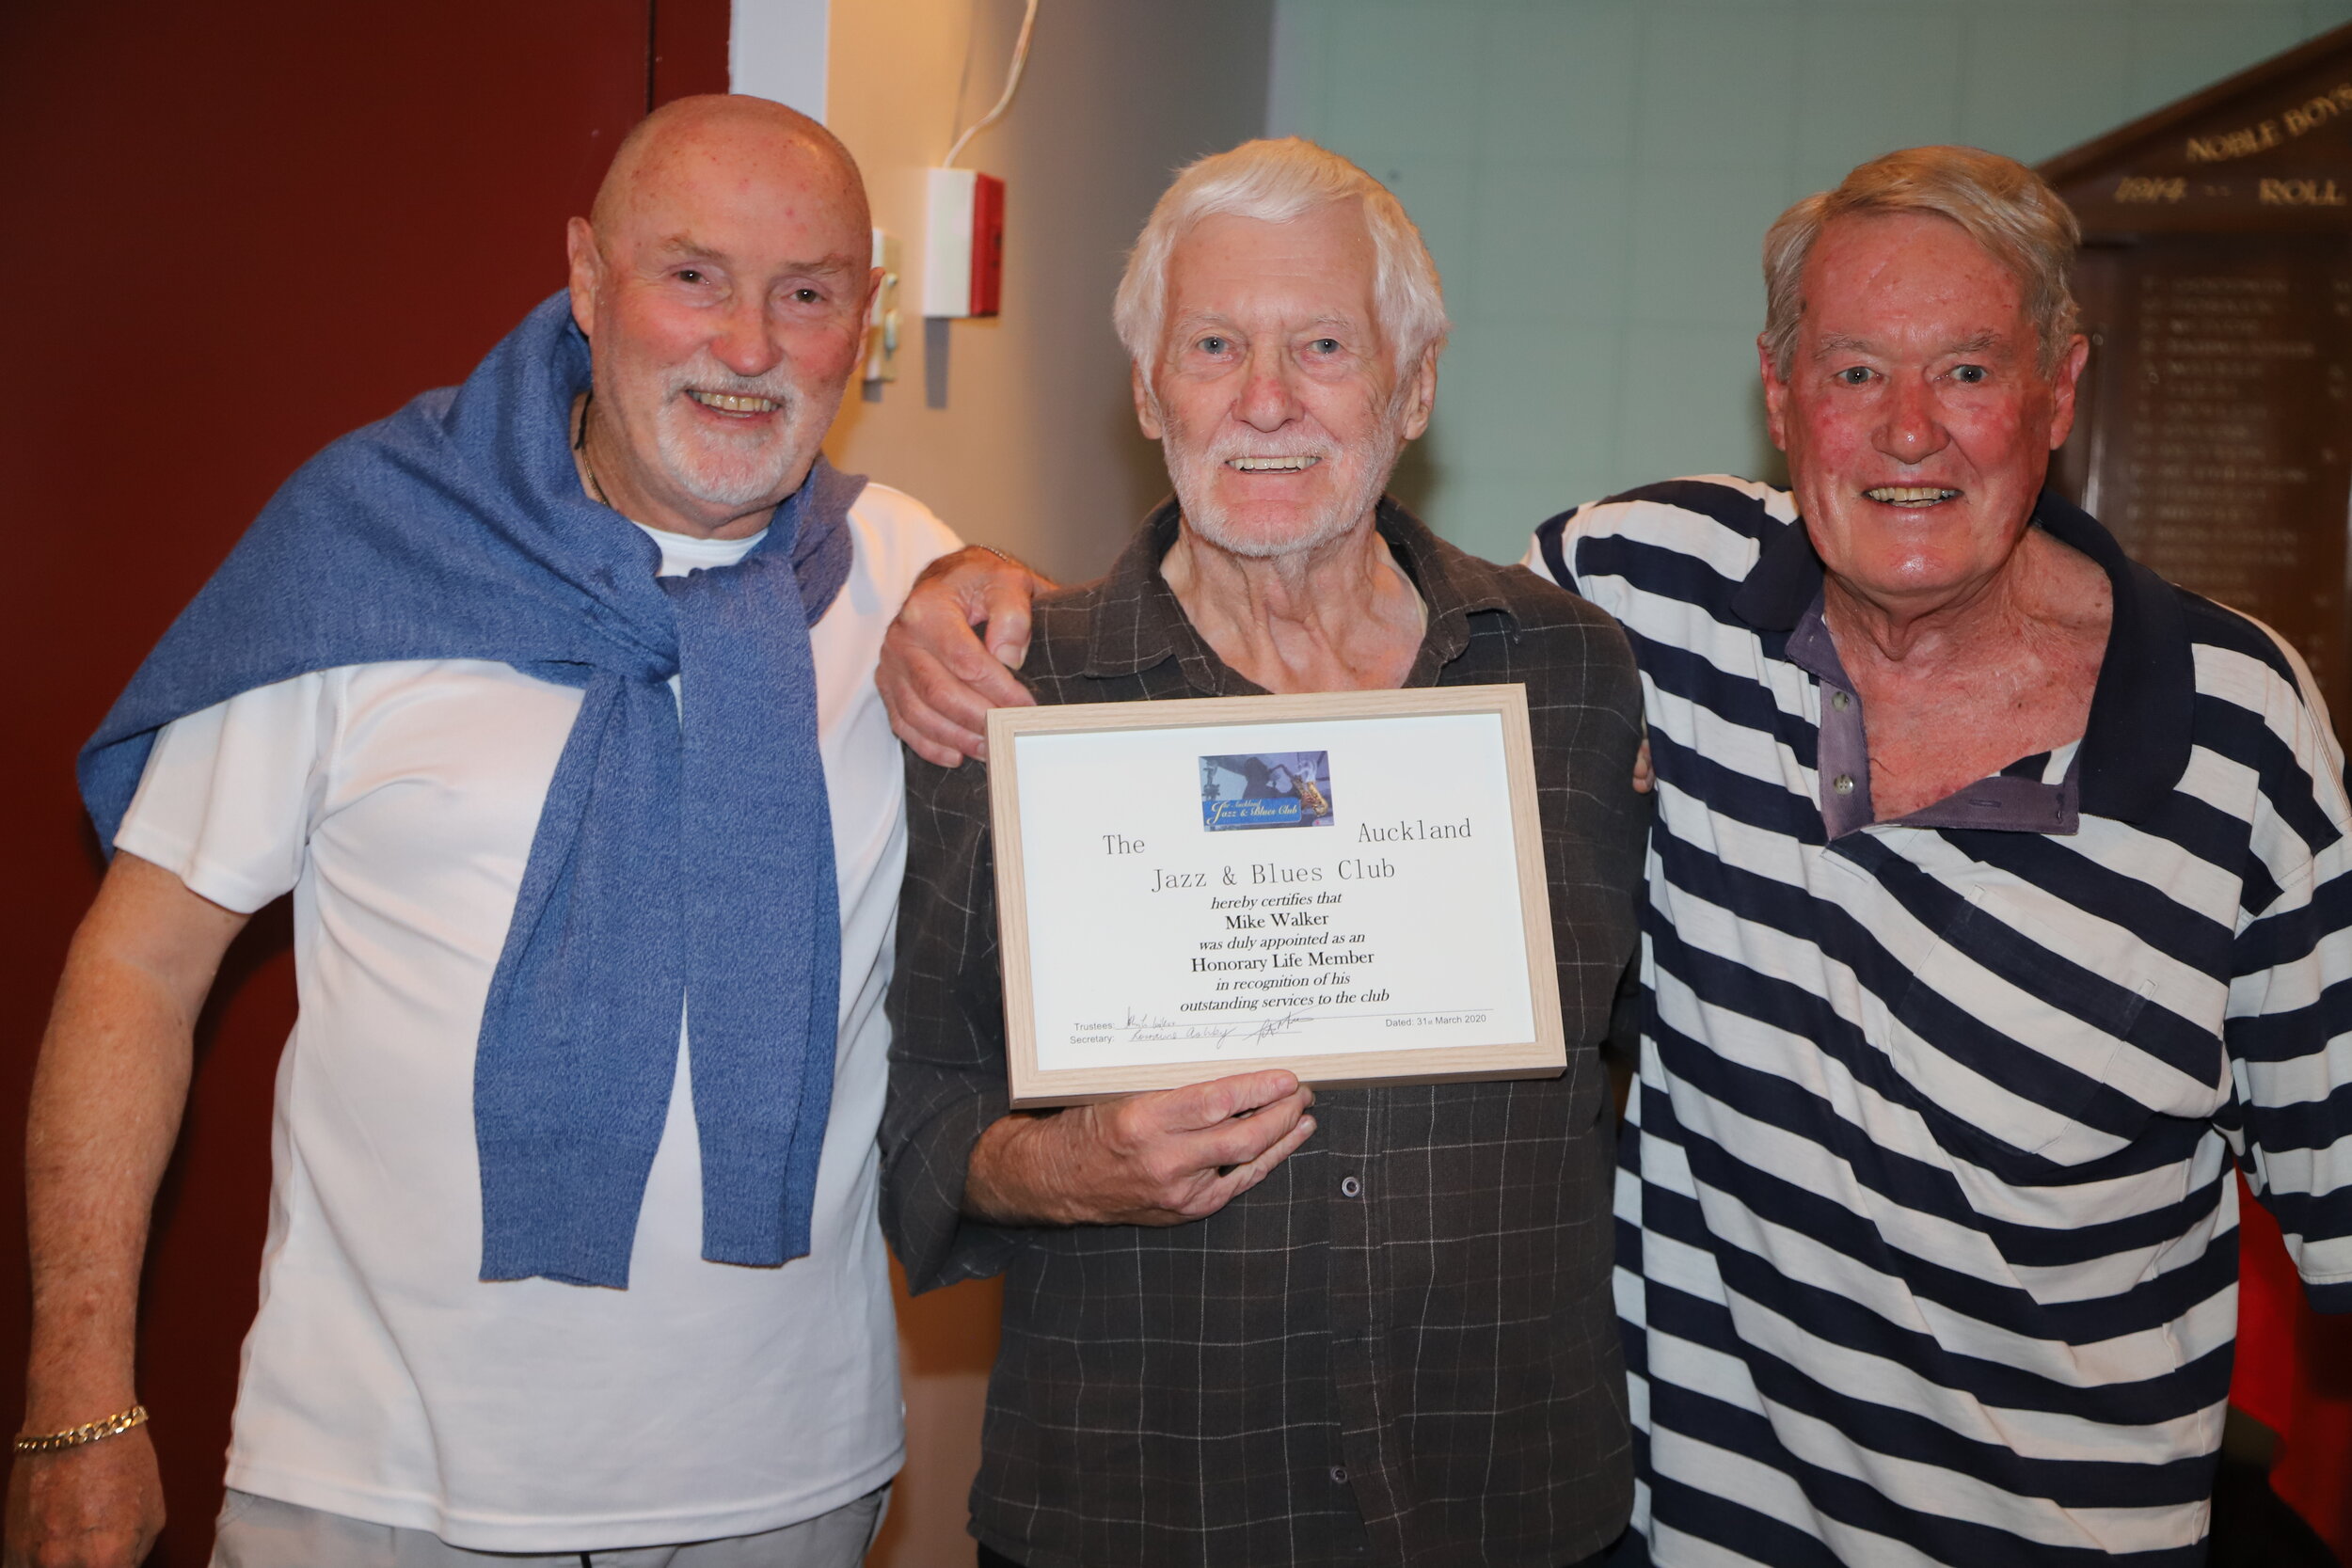 Mike with trustees Pete McGregor and John Wilcox. (Absent - Eric Allen, trustee and life member)